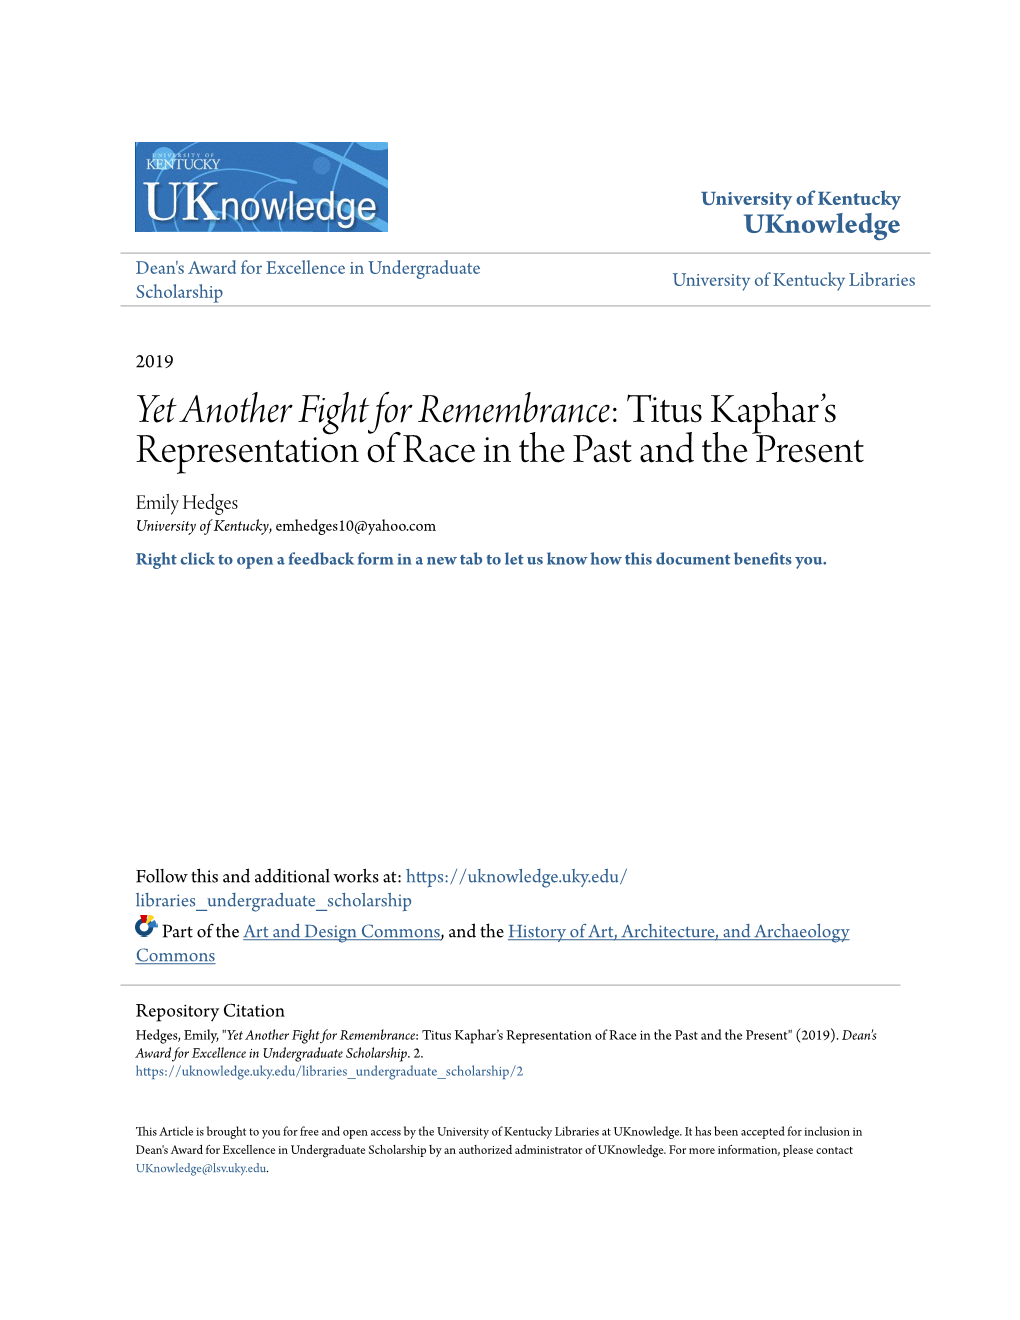 Yet Another Fight for Remembrance: Titus Kaphar's Representation Of